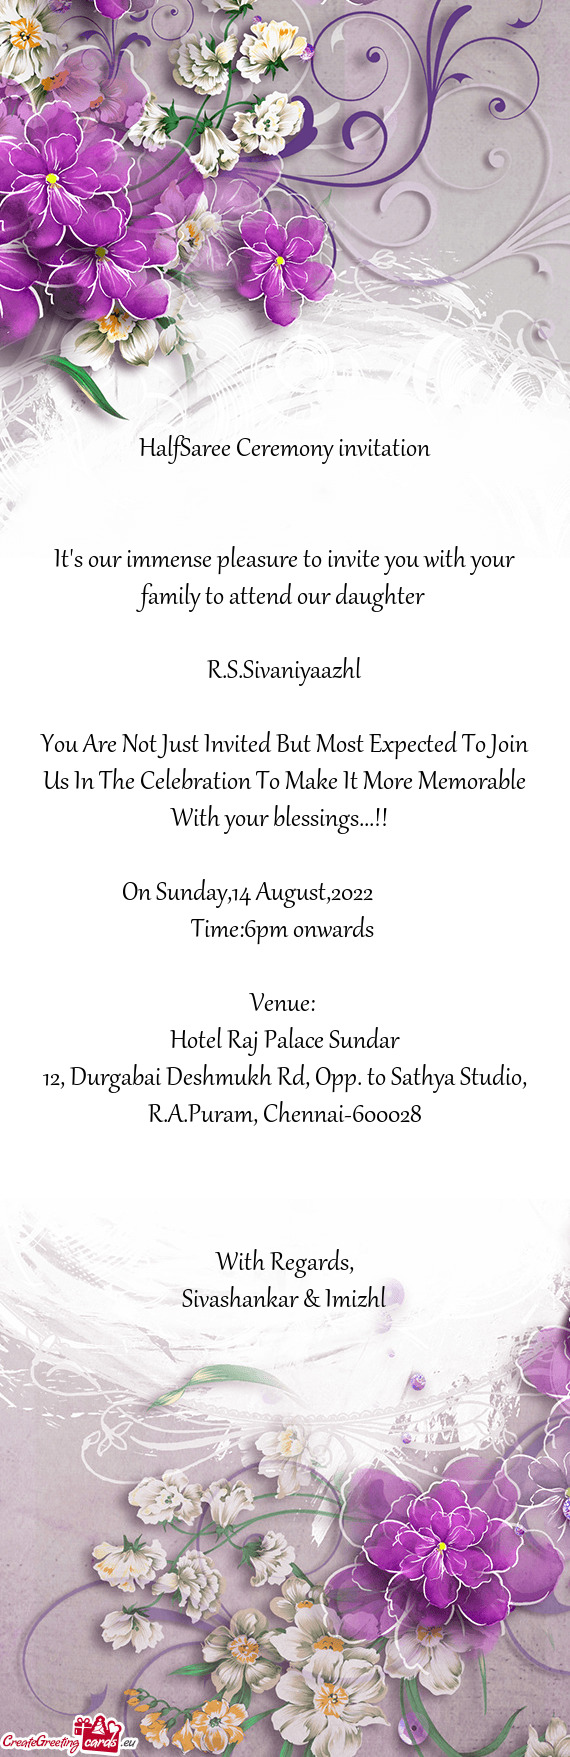 You Are Not Just Invited But Most Expected To Join Us In The Celebration To Make It More Memorable W